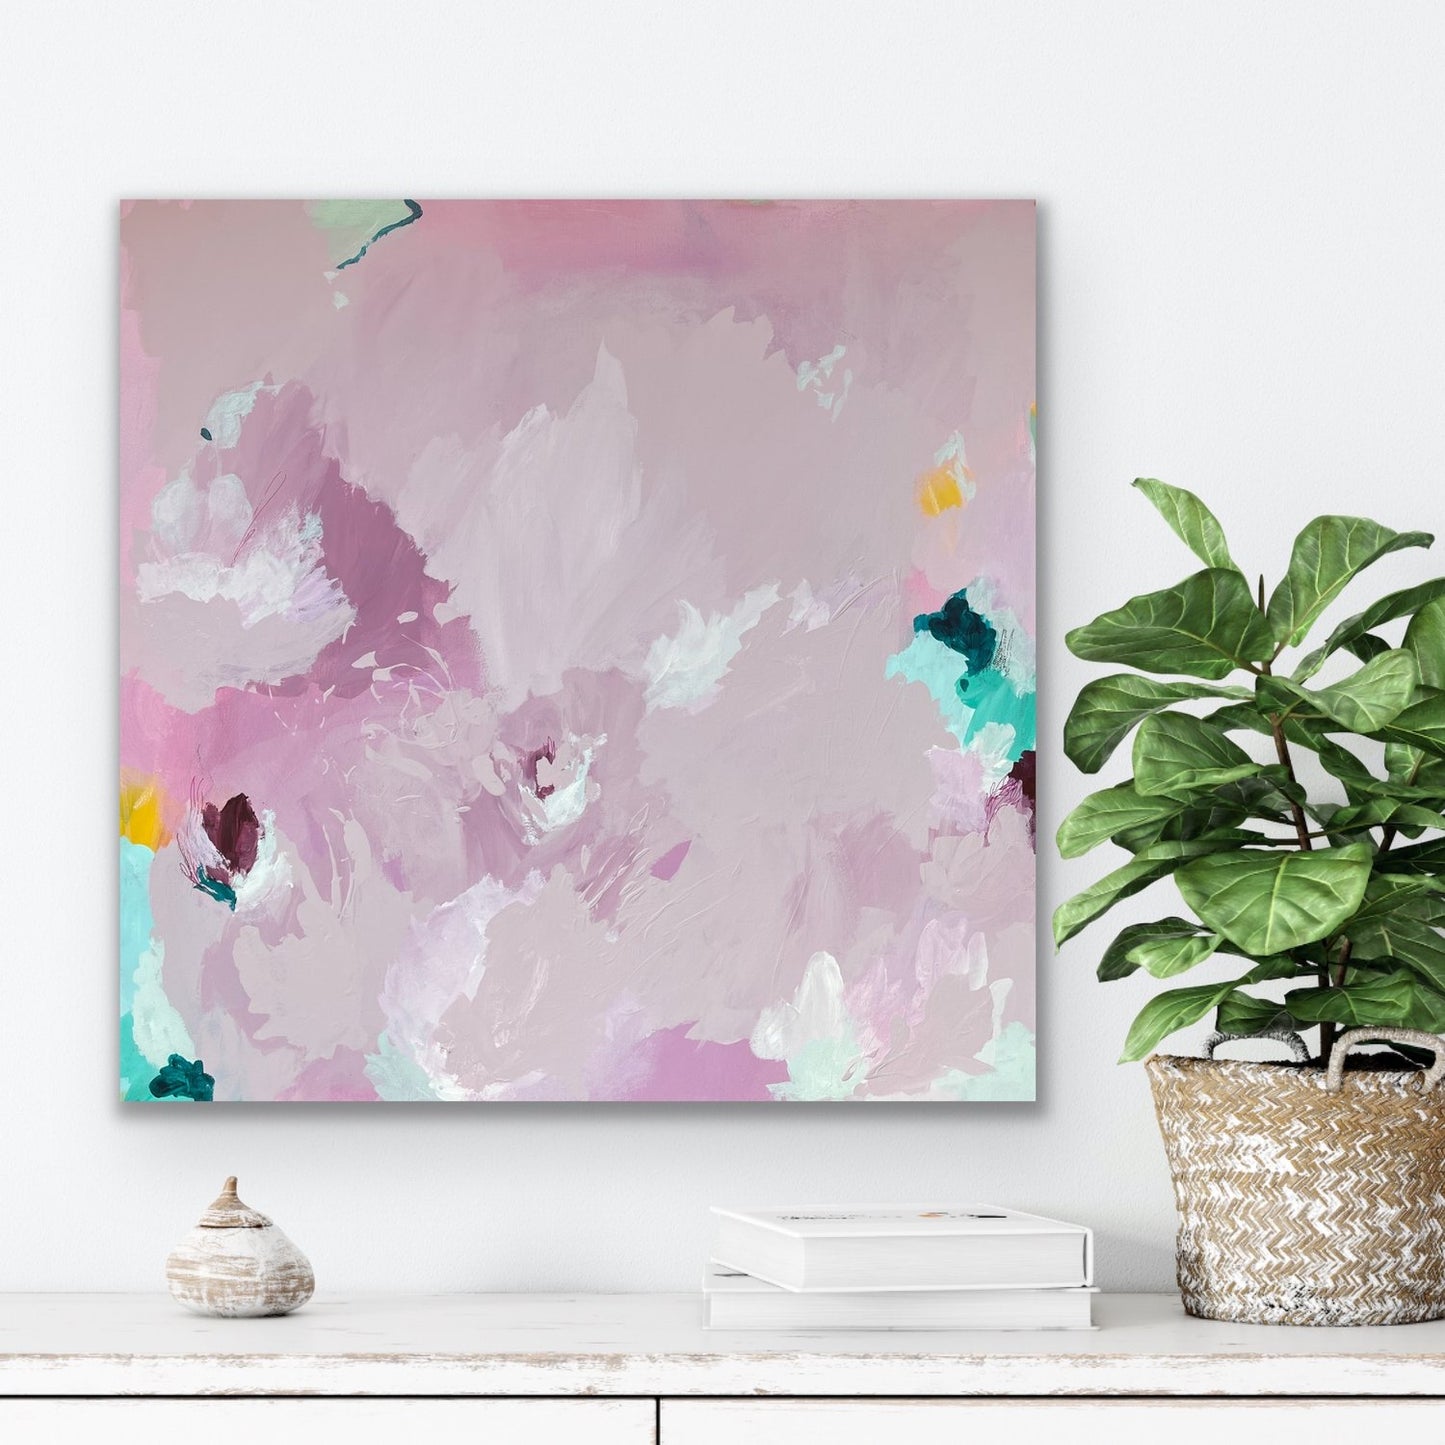 A Whisper in Pink, original painting, framed in raw timber, 65cm x 65cm, Vanessa Maver